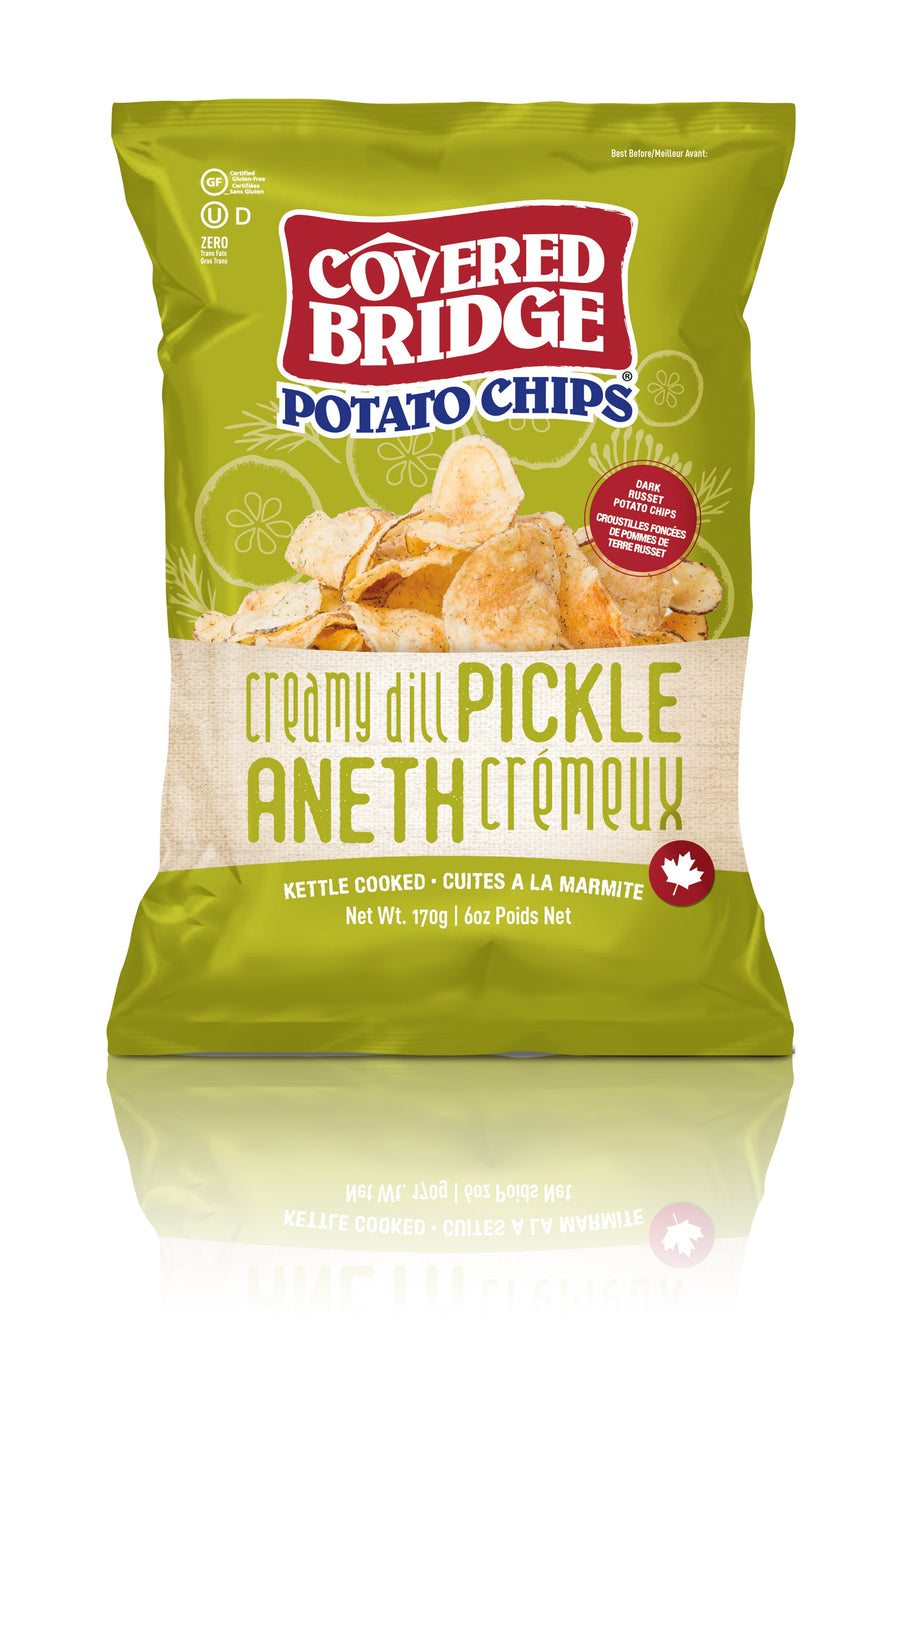 Covered Bridge Chips – Creamy Dill Pickle – Gluten Free, Kosher, Kettle Cooked with Dark Russet Potatoes – Made in Canada